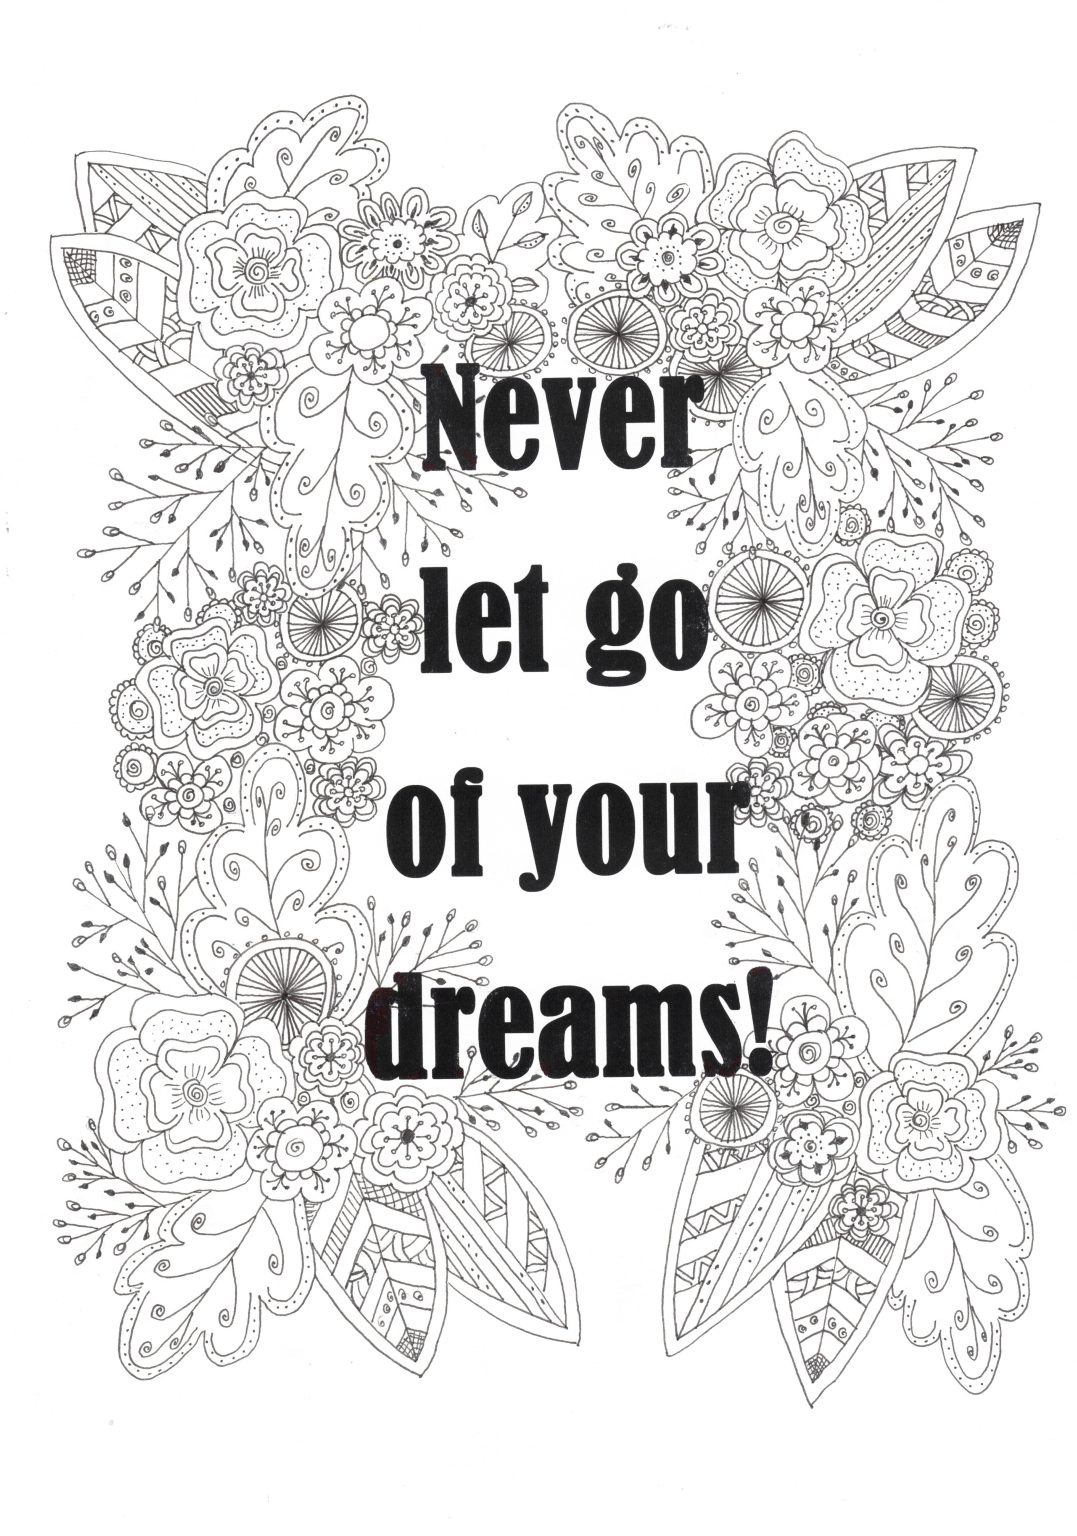 Never let go of your dreams